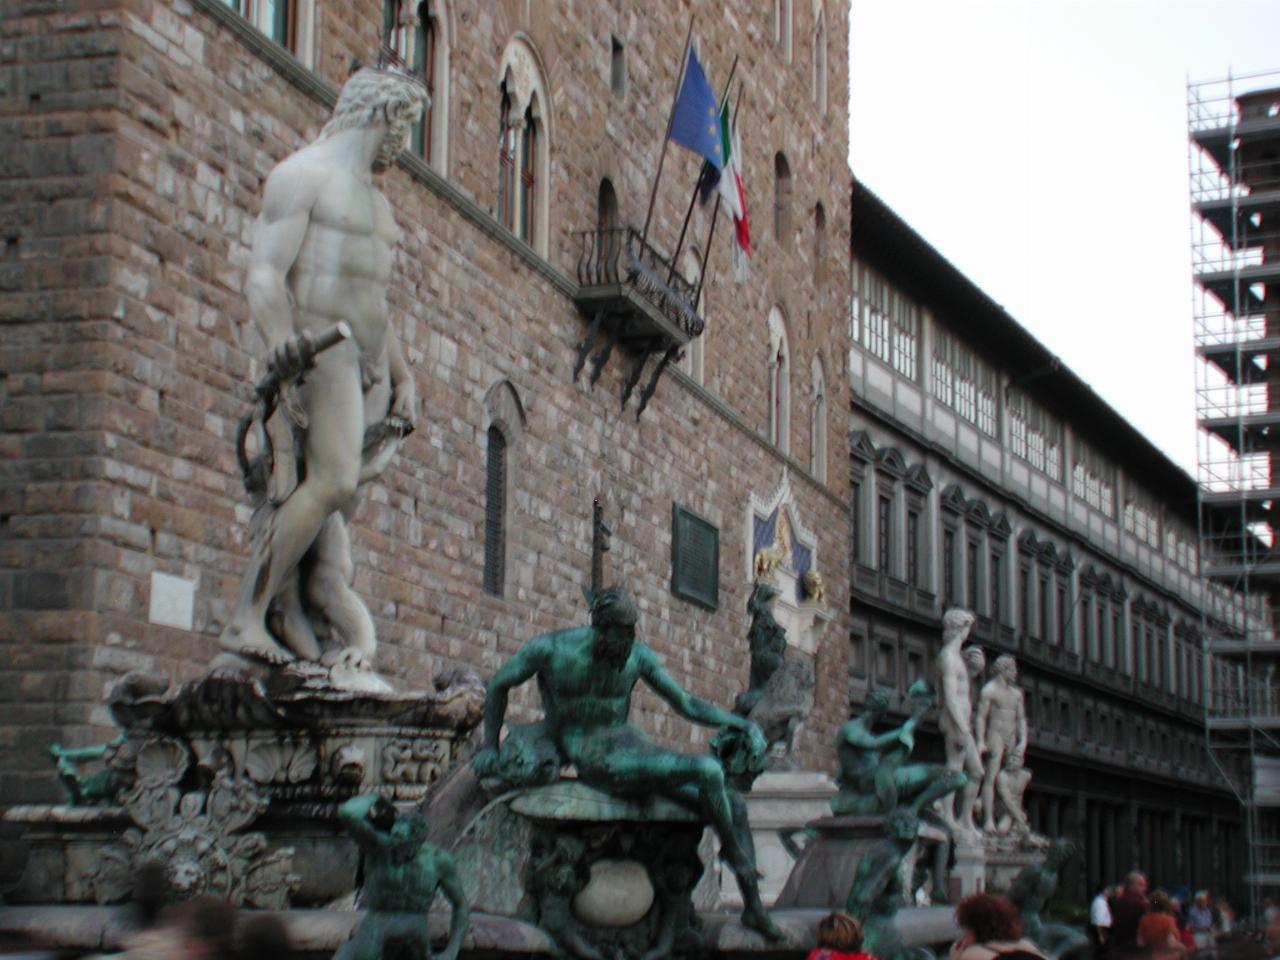 Statues (including David) in front of Palazzo Vecchio